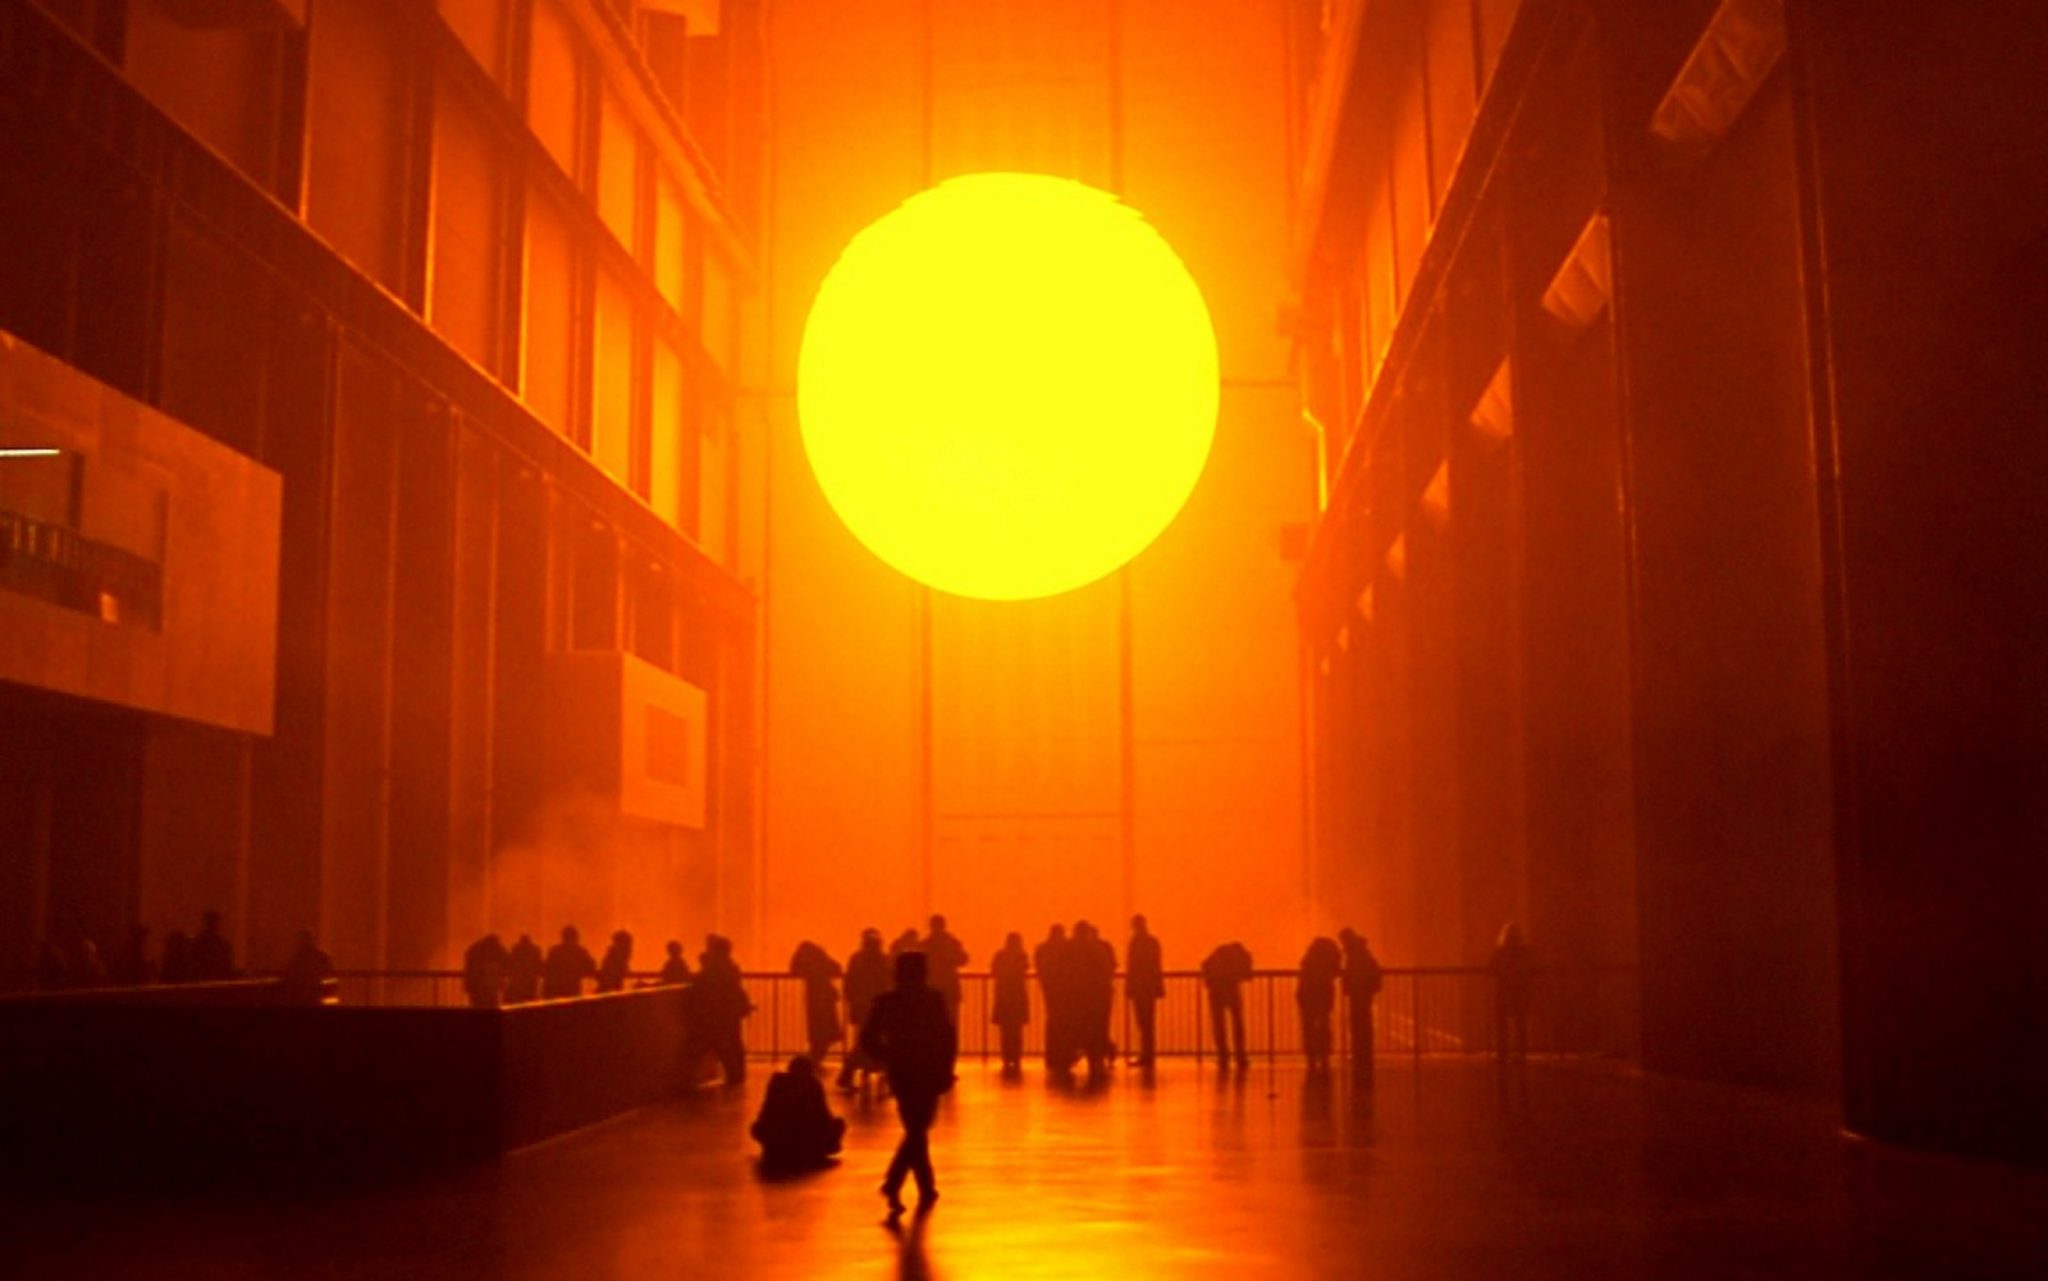 Olafur Eliasson, The Weather Project